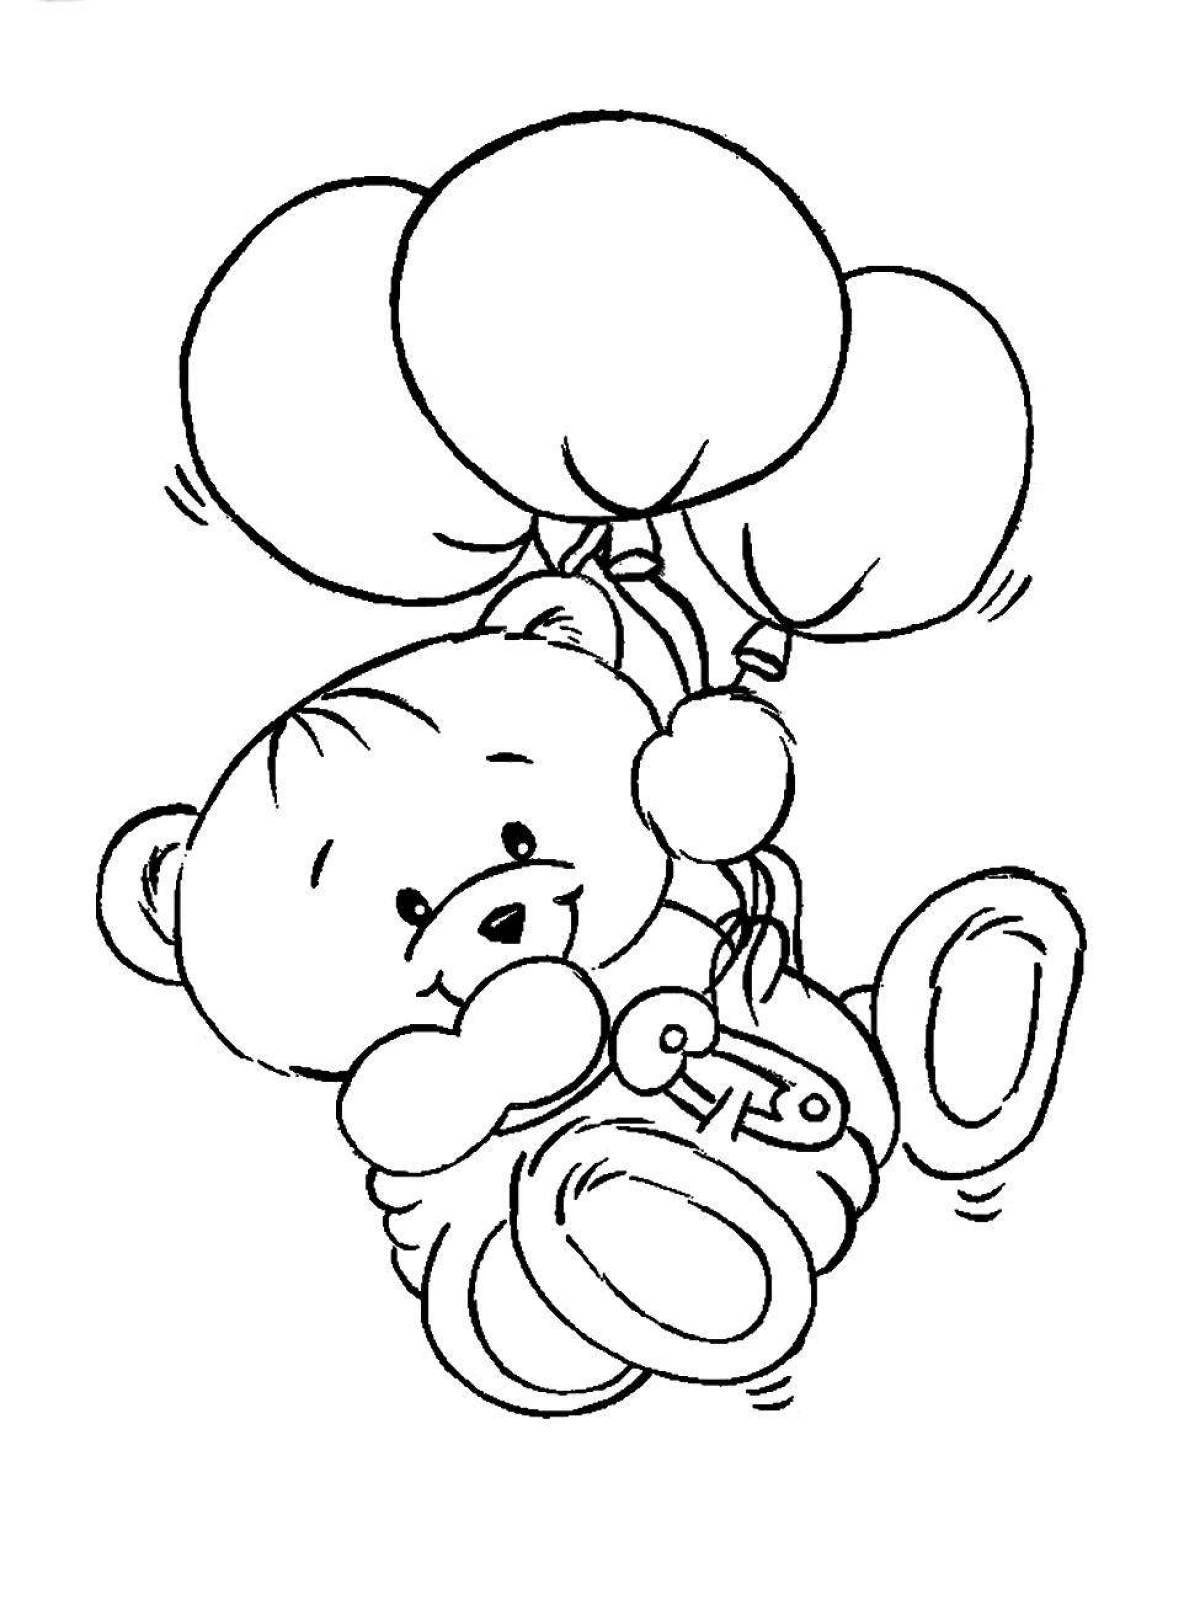 Excited bear with balloons